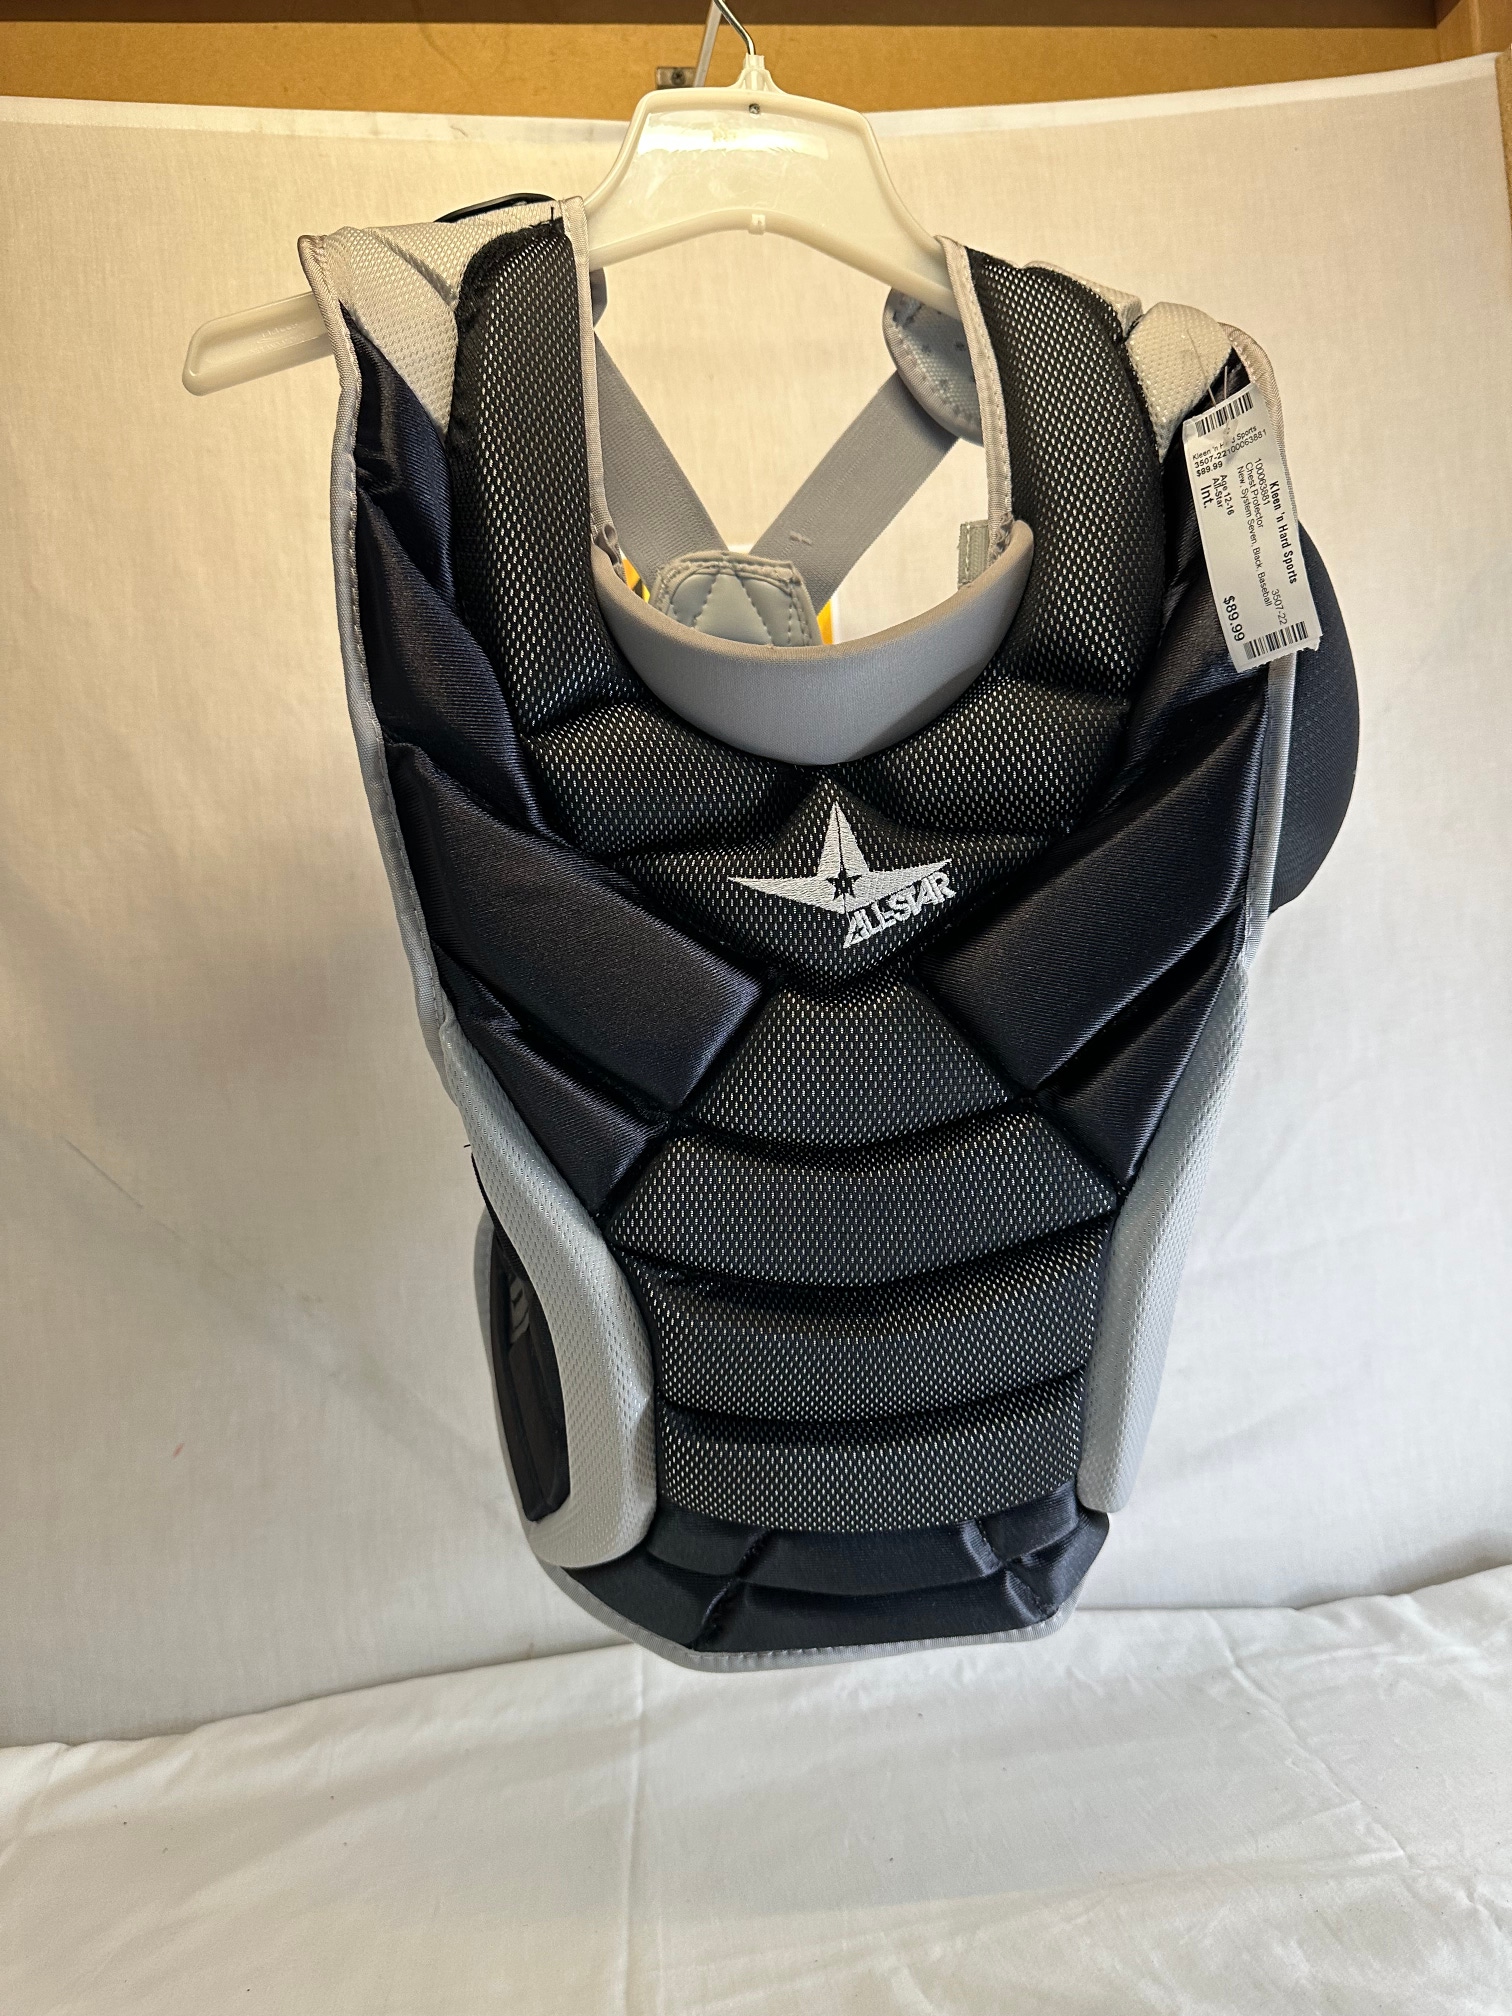 New All Star System 7 Catcher's Female Chest Protector